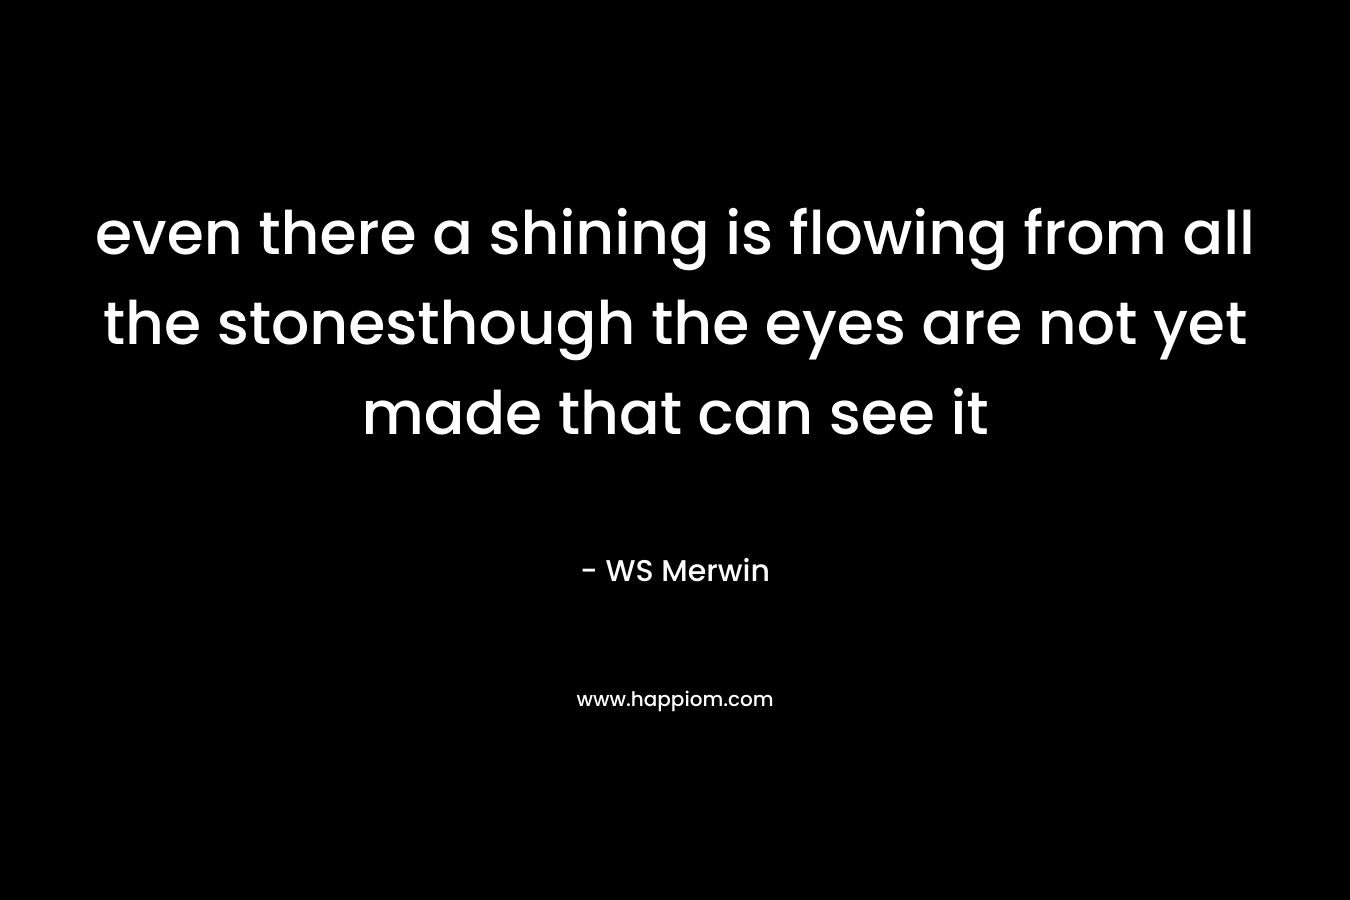 even there a shining is flowing from all the stonesthough the eyes are not yet made that can see it – WS Merwin